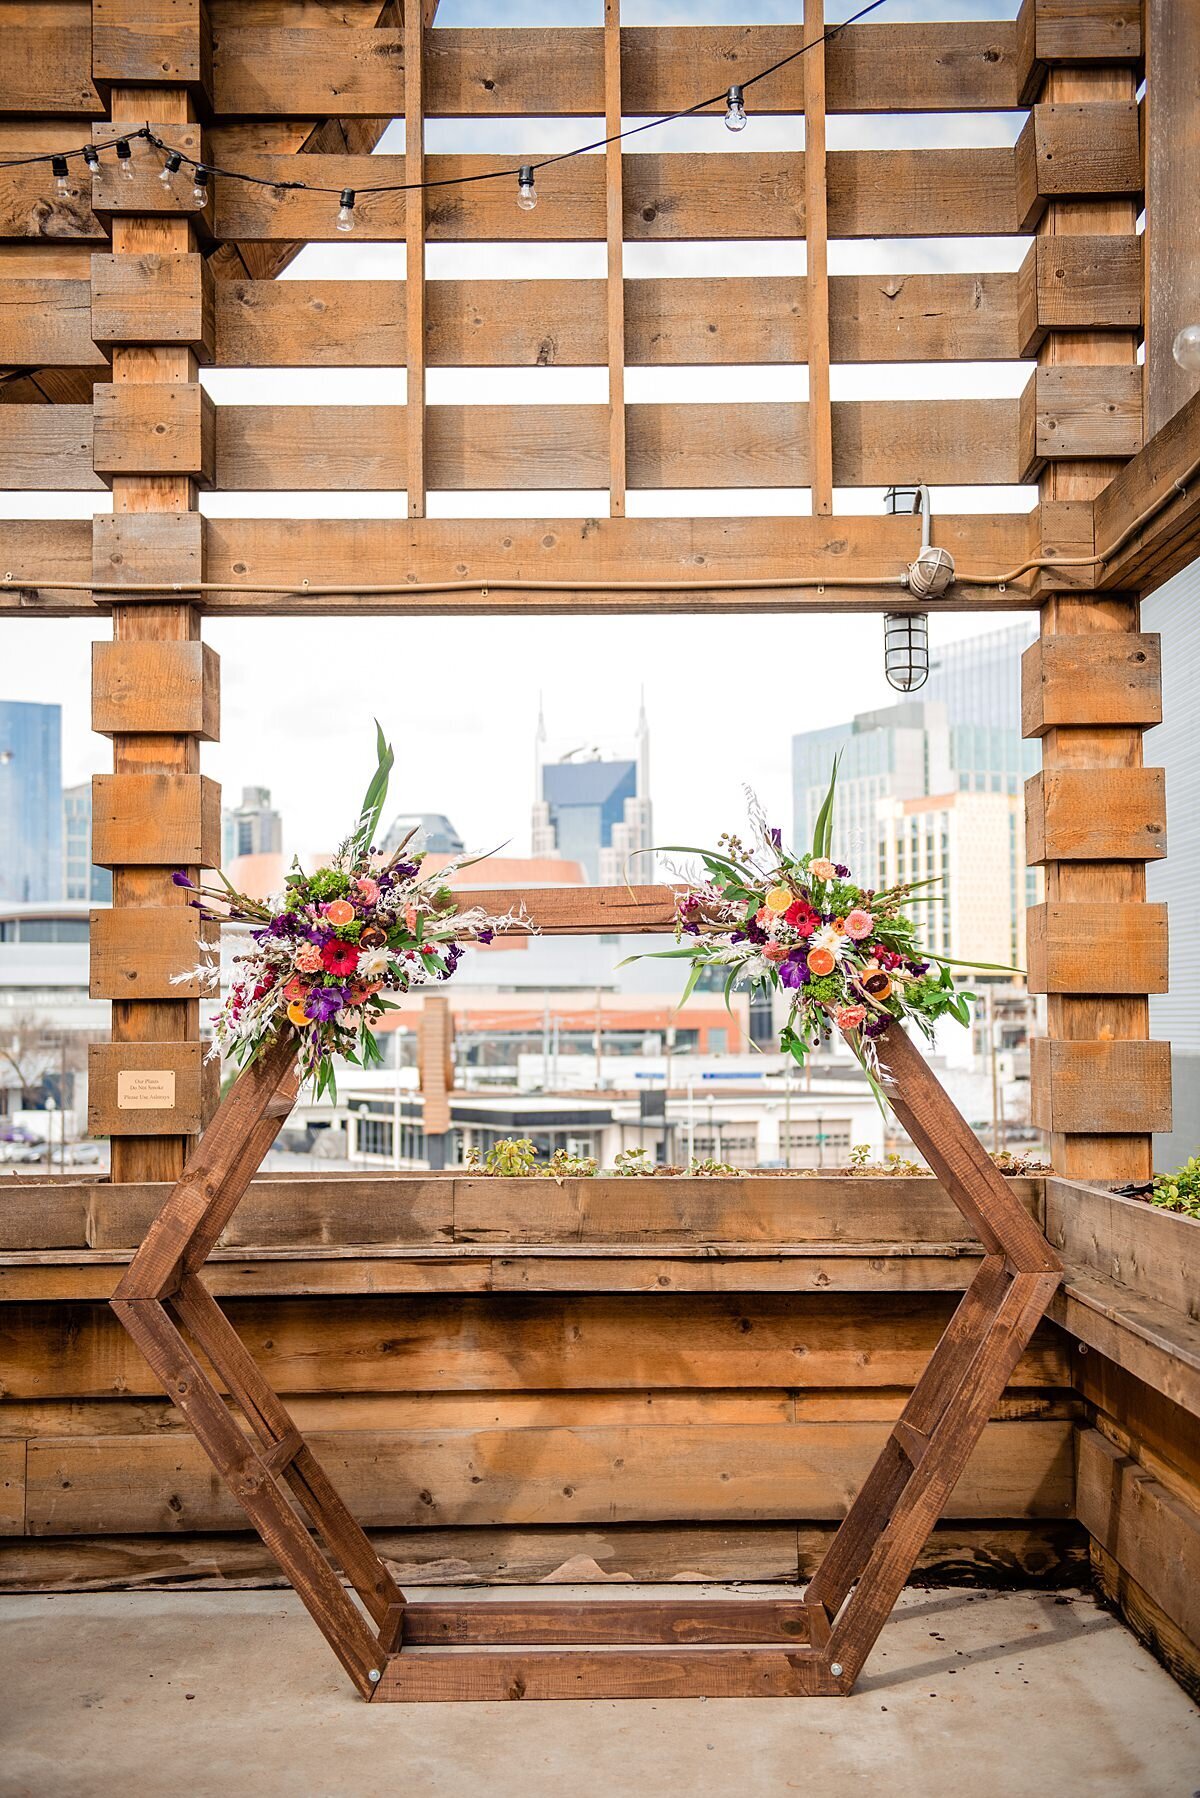 Octagonal barn wood wedding ceremony arbor  sits on the patio at City Winery Nashville. The Nashville city skyline is in the background. The circular arbor is decorated with two floral sprays of red, white, pink and purple flowers with eucalyptus.